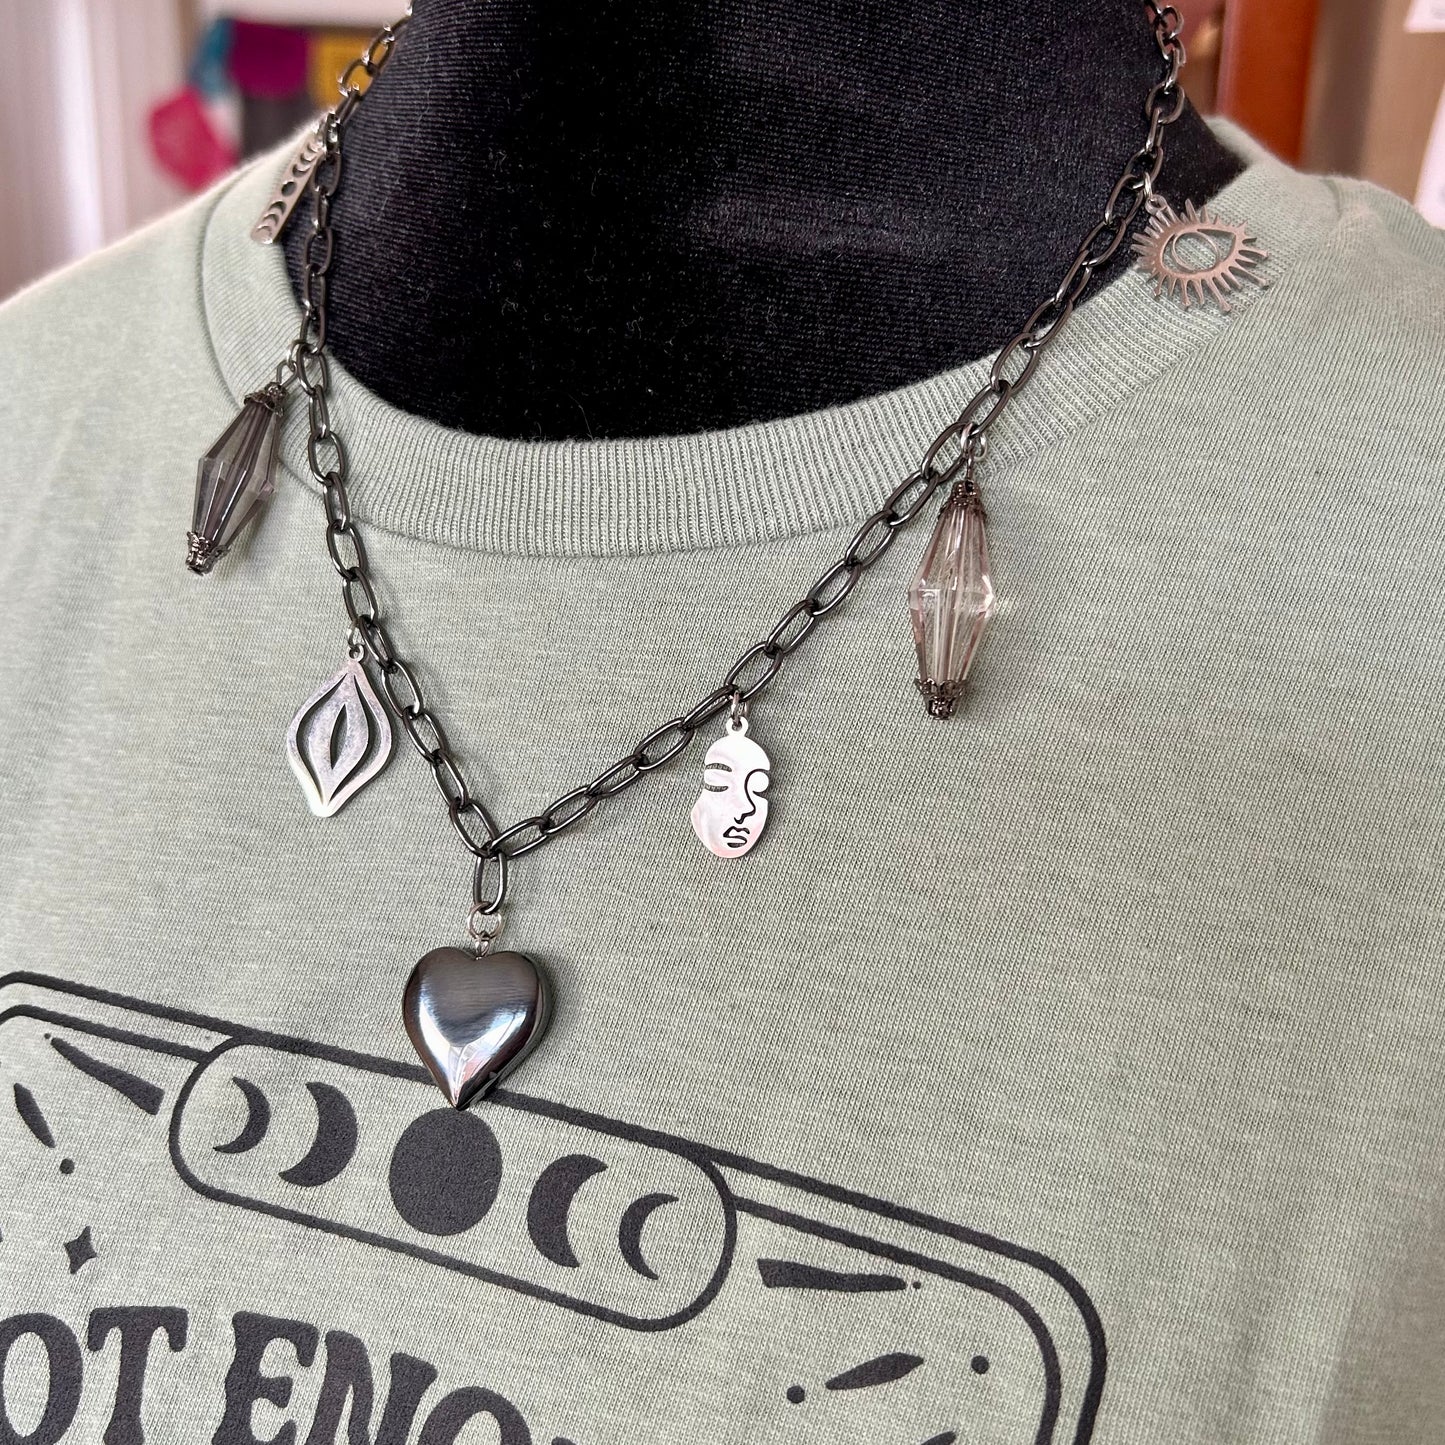 Hematite Heart Charmed Necklace